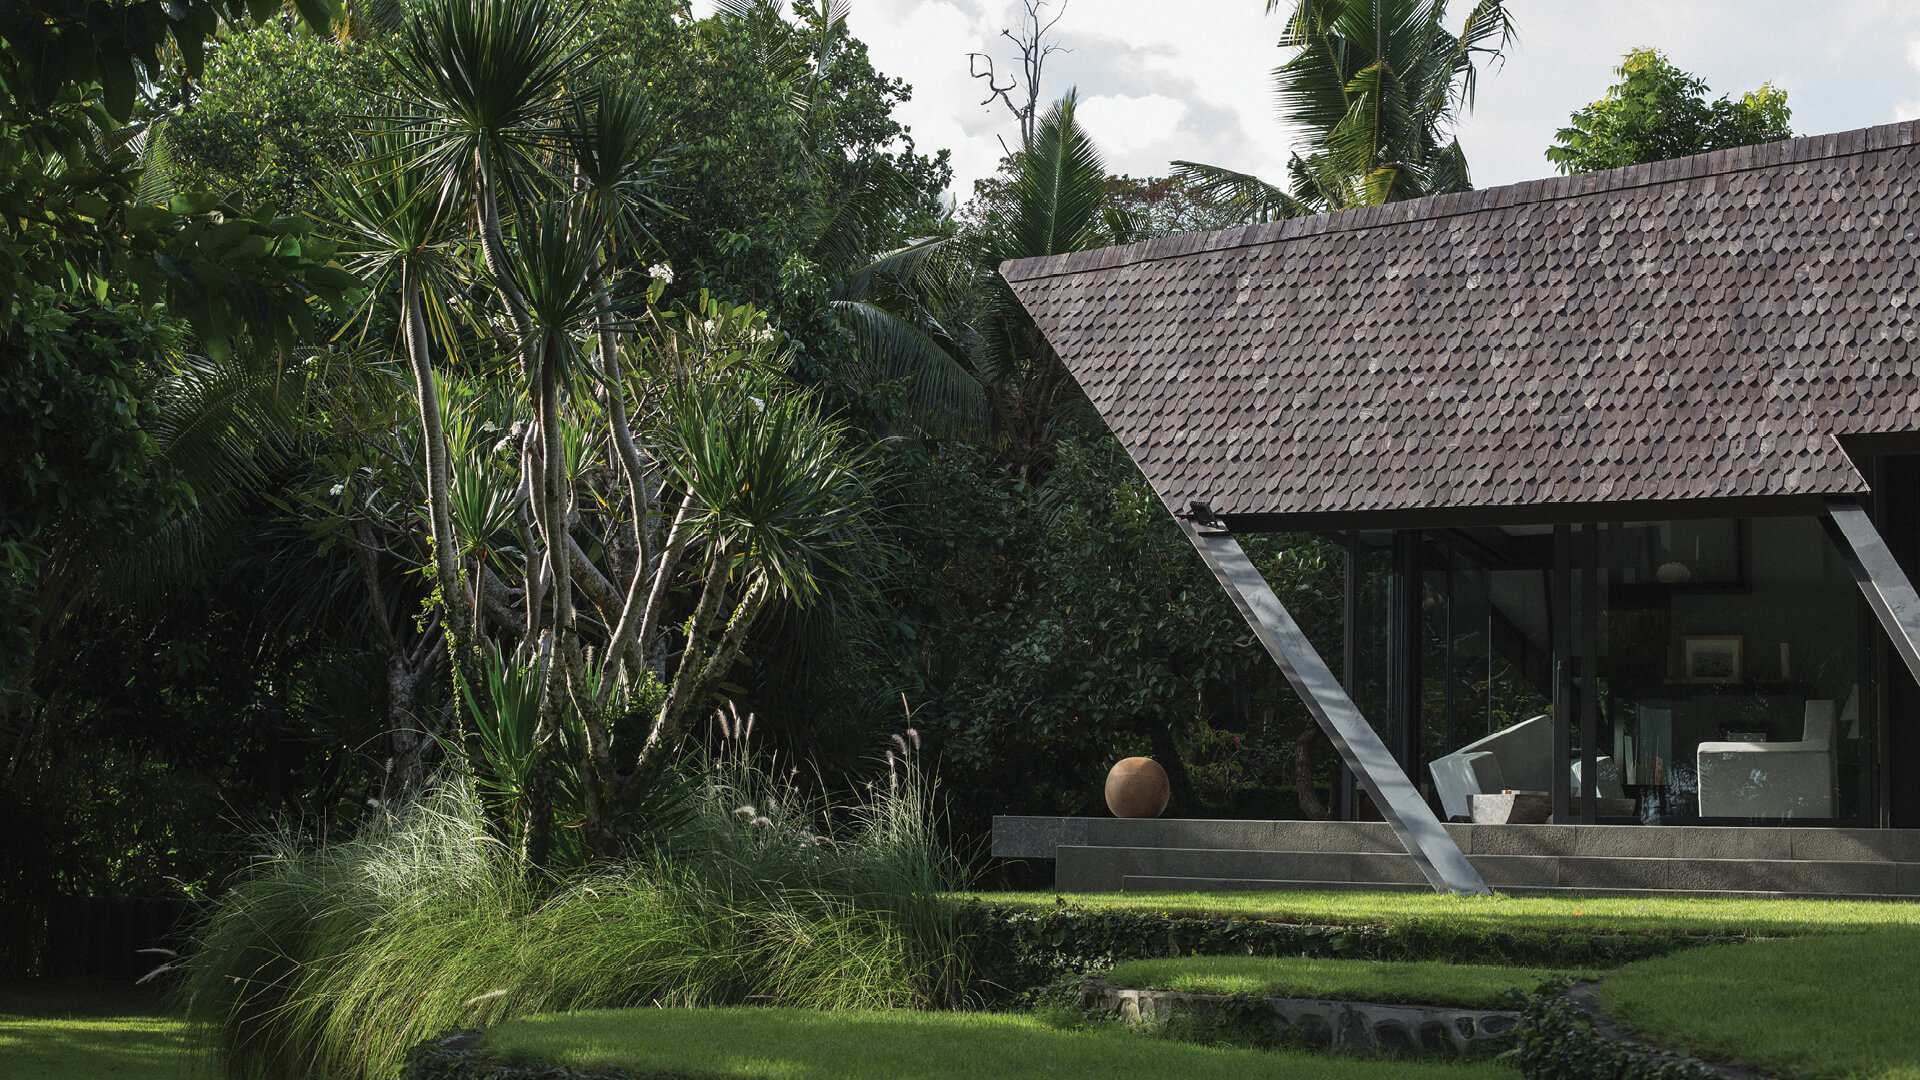 The central courtyard of the Dukuh House designed by designer Maximilian Eicke in Bali, Indonesia